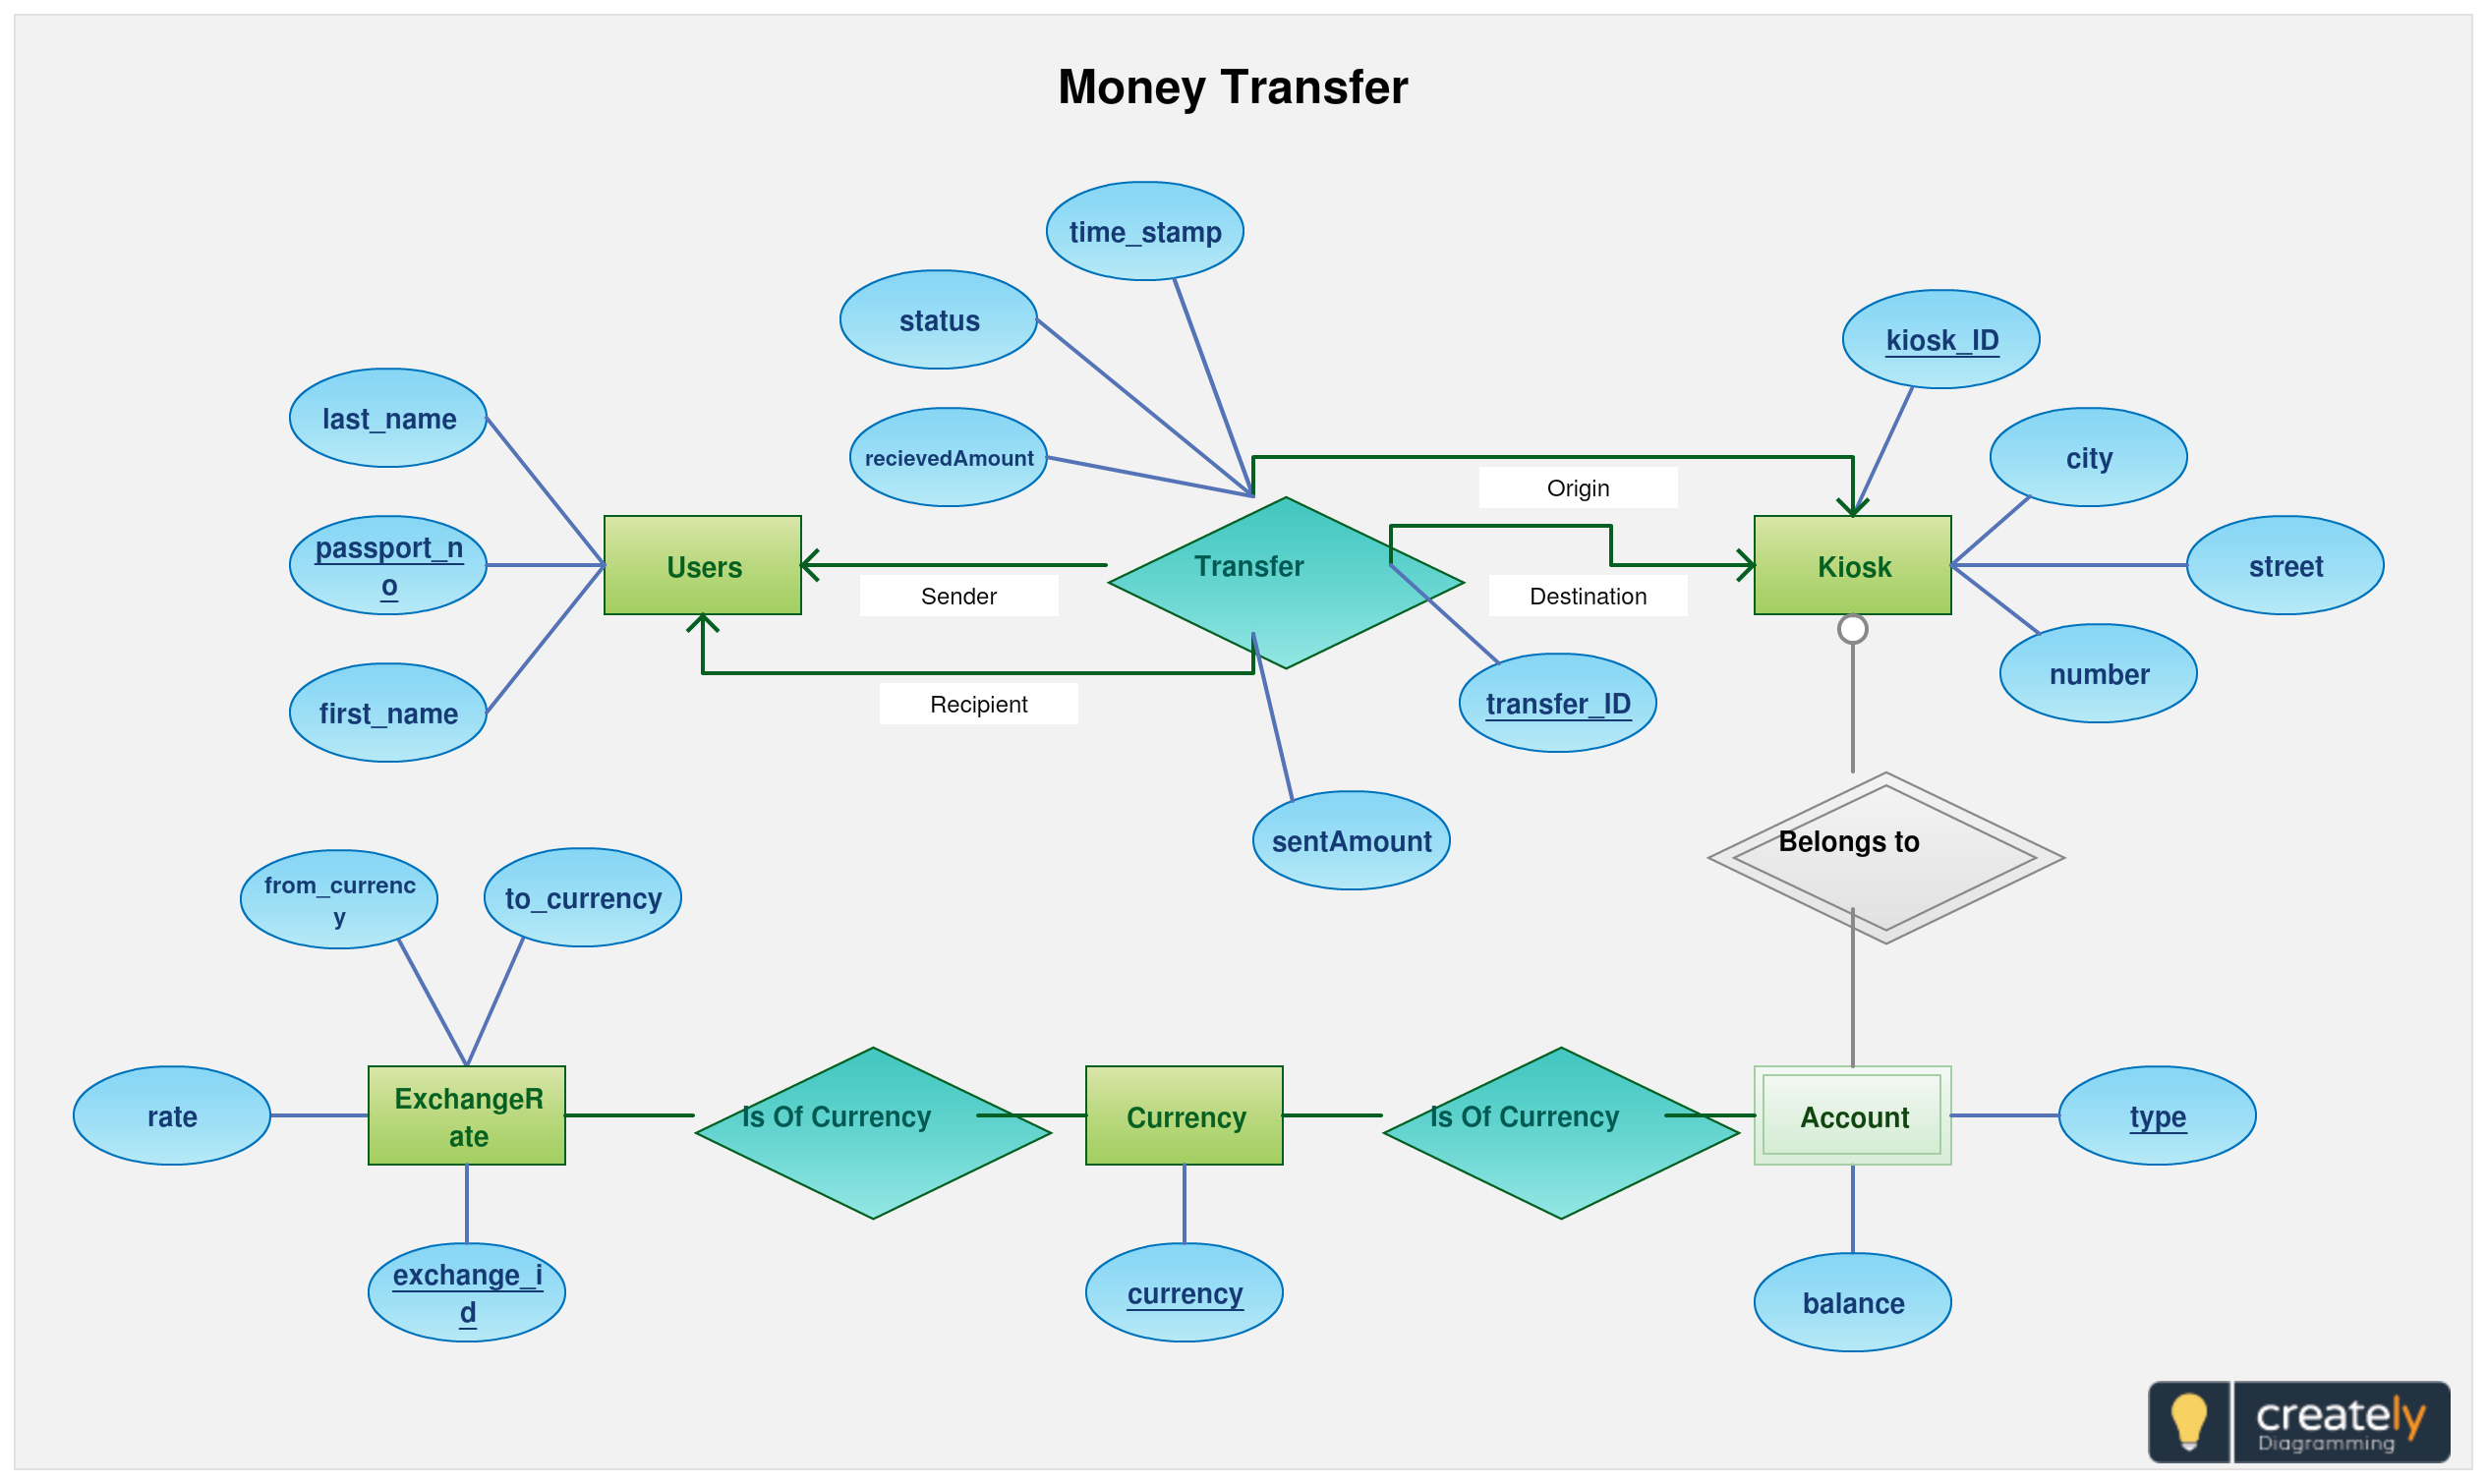 Entity Relationship Diagram Of Fund Transfer - Use This inside Relationship In Er Model